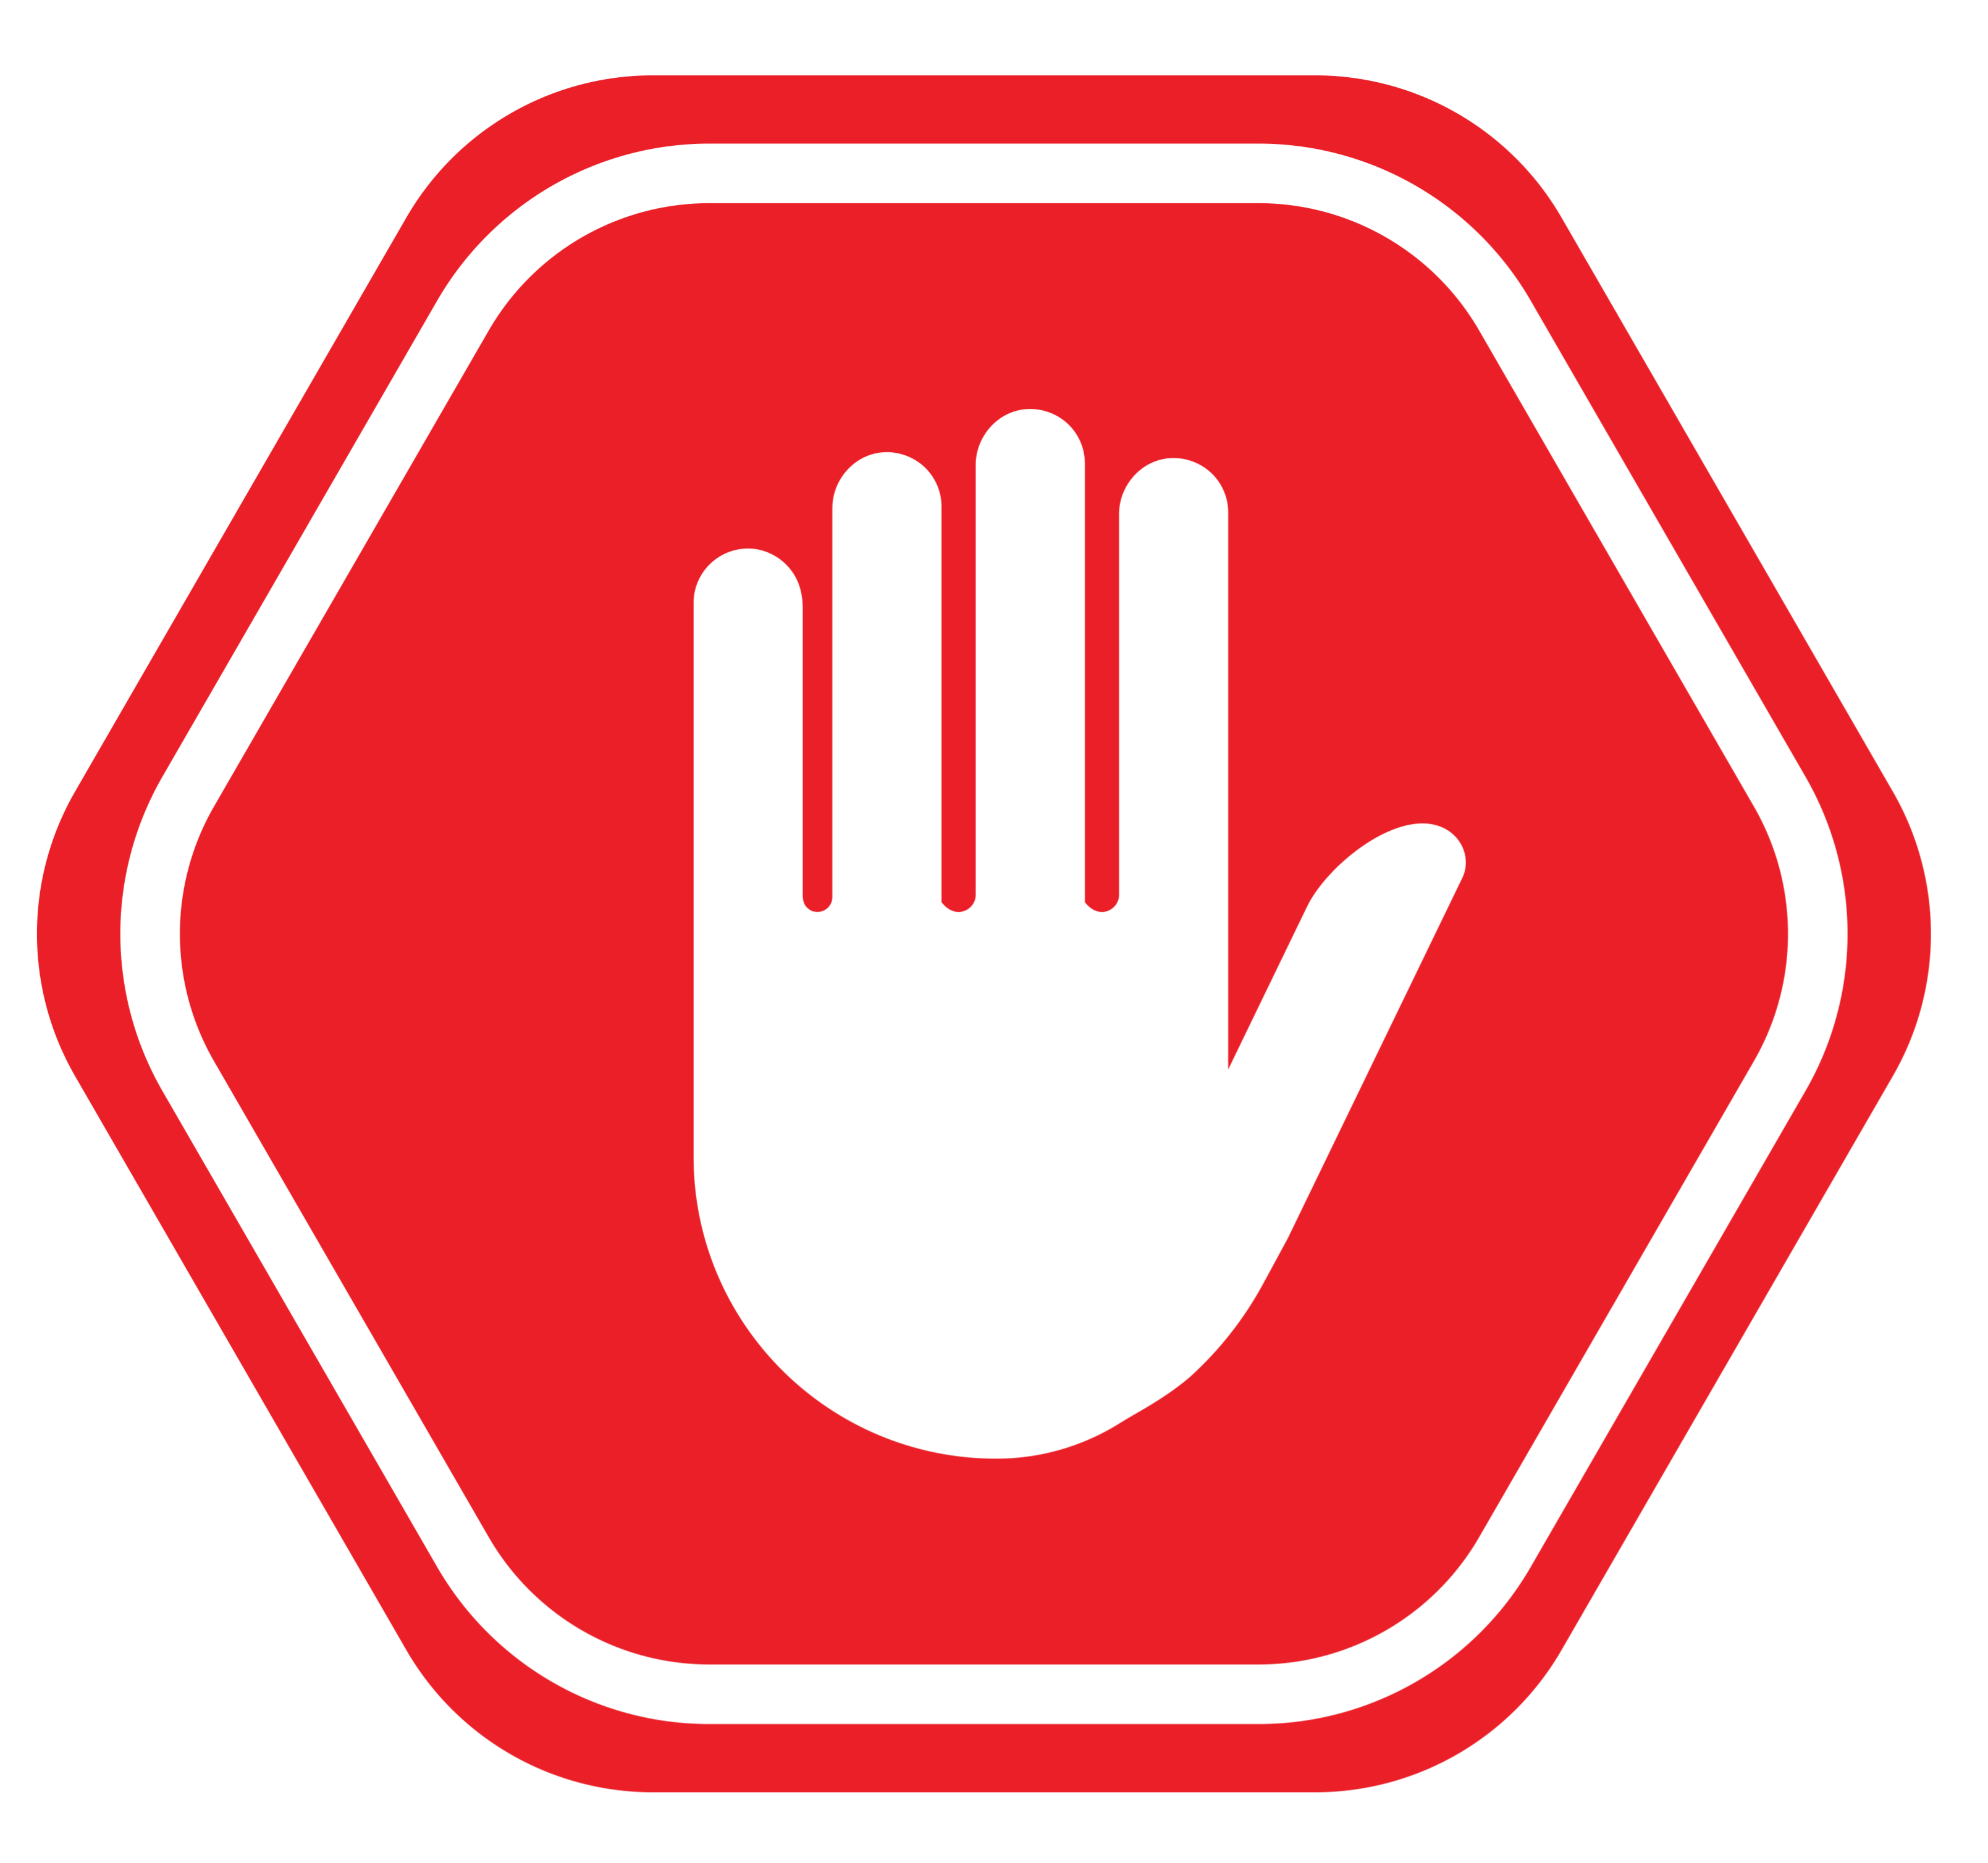 Stop-sign-push-hand1.png